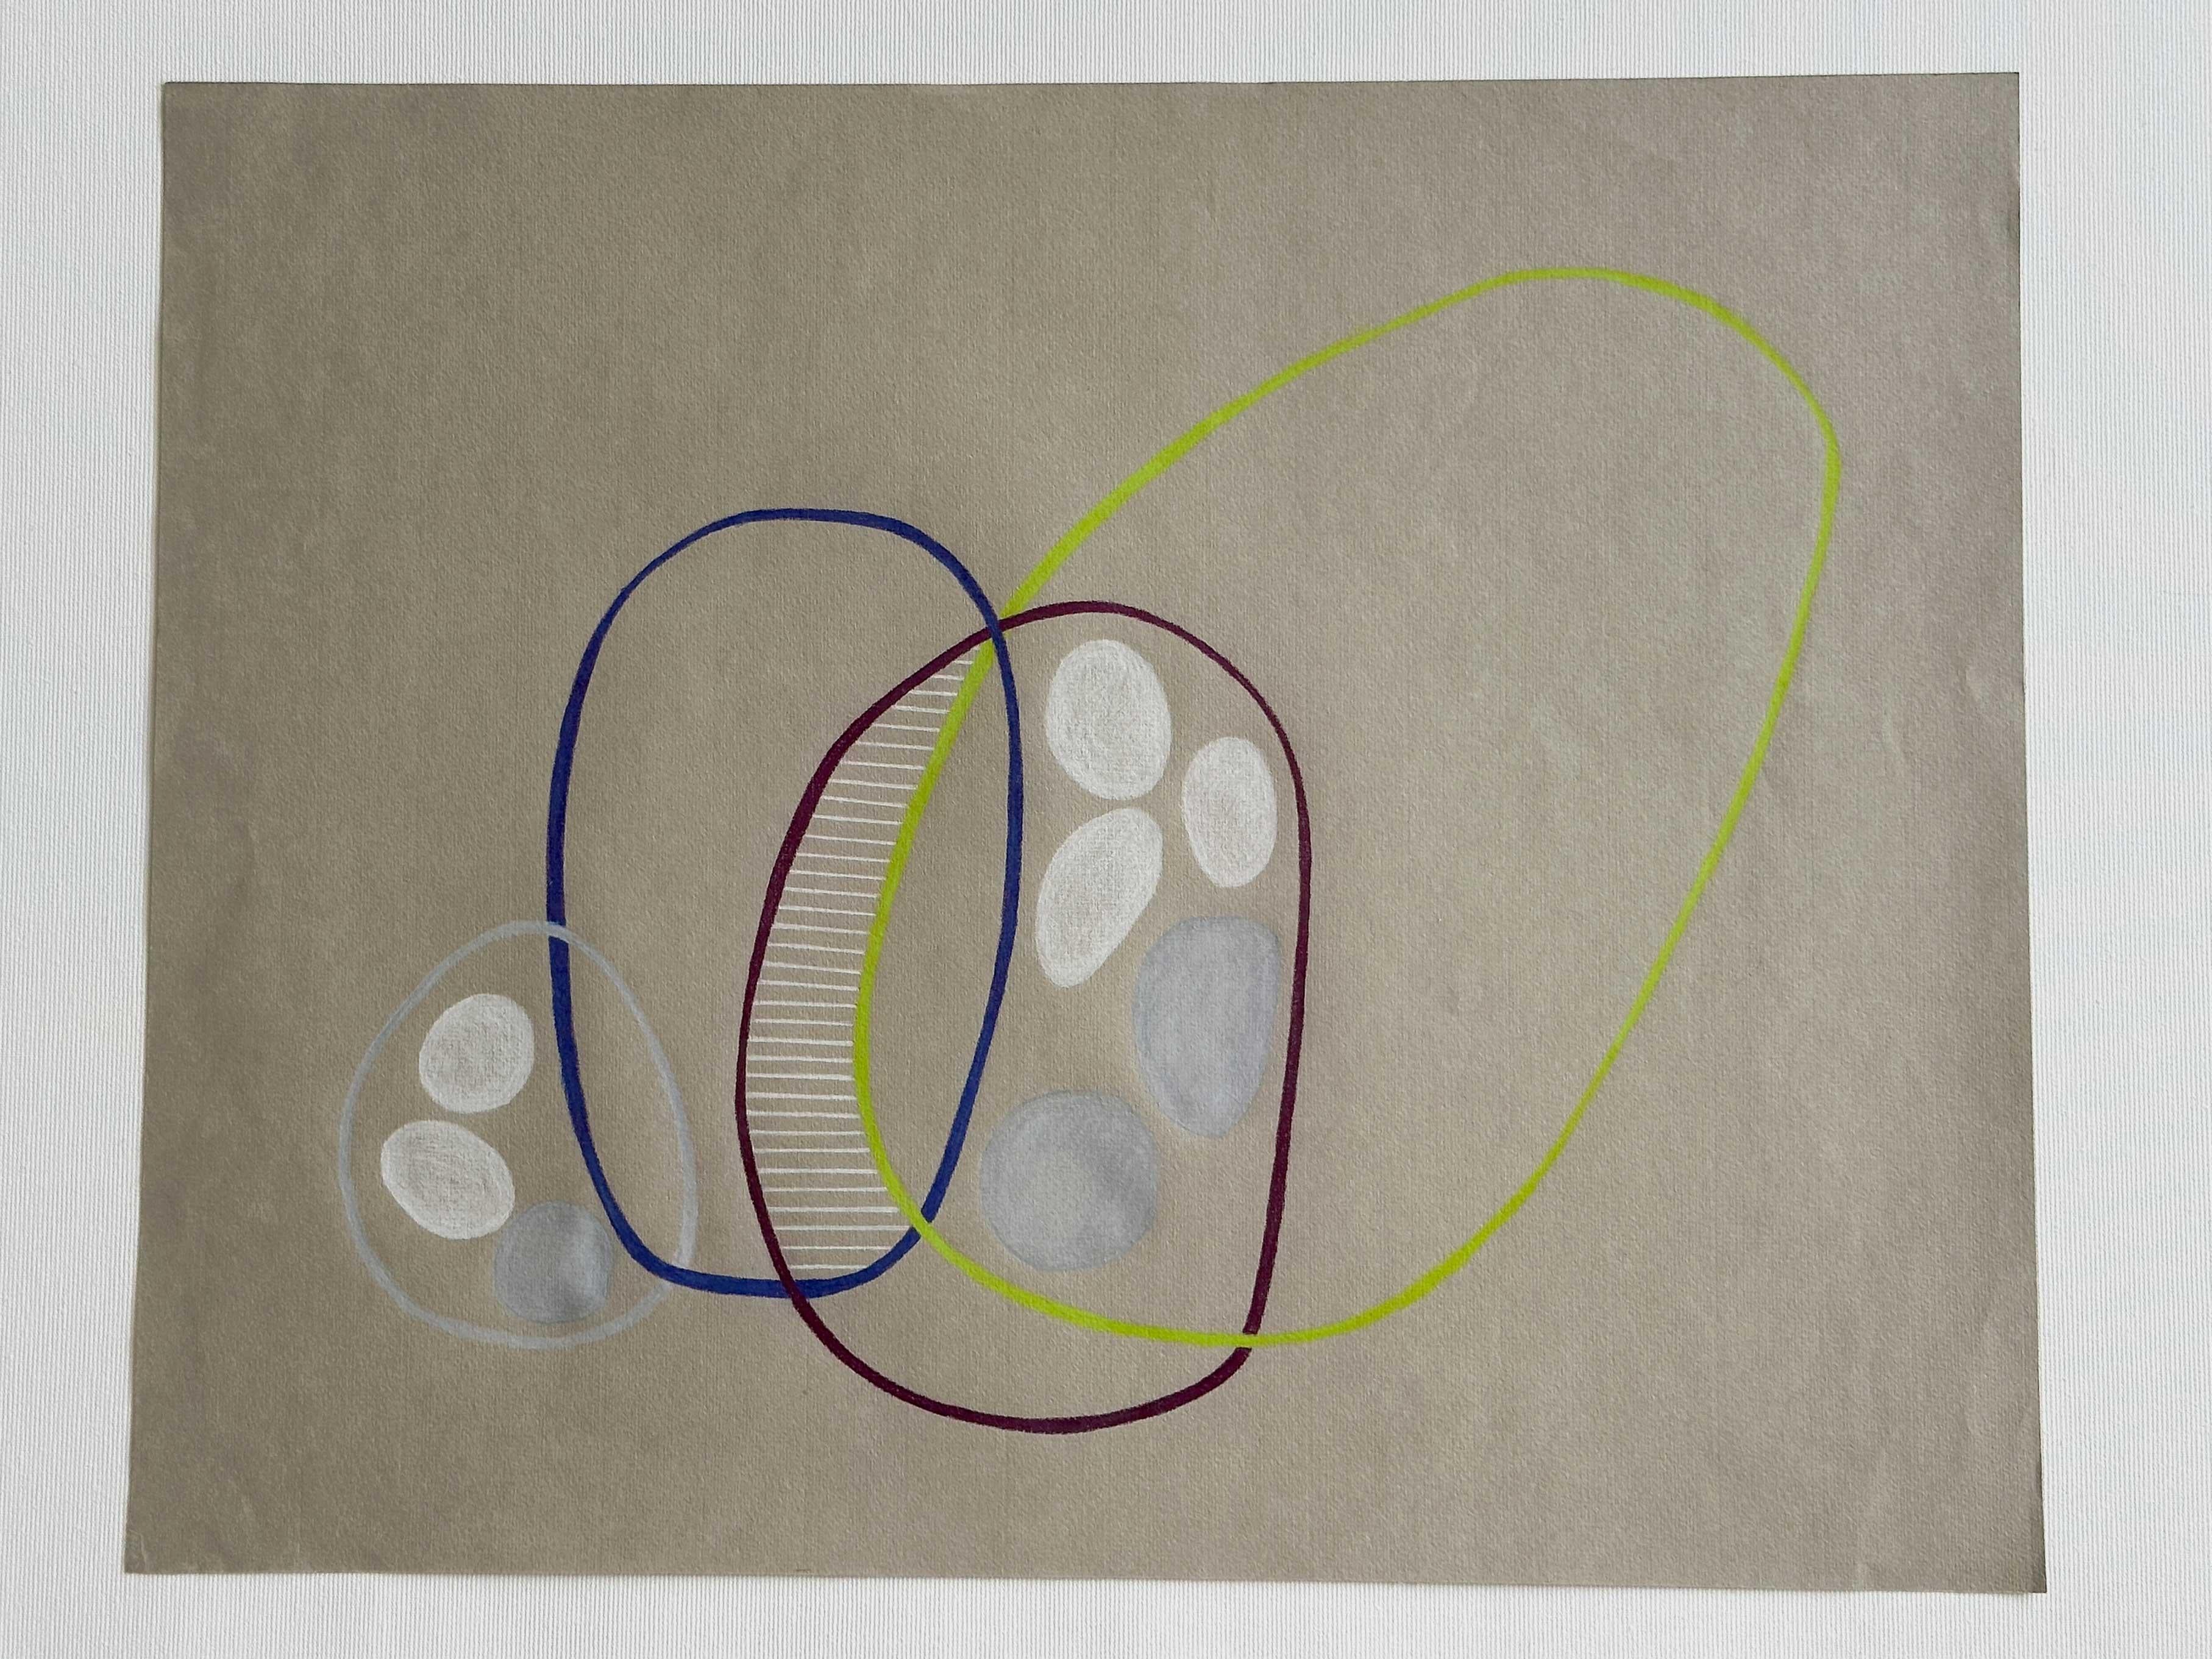 Venn Diagram Drawing on Paper Color Pencil modern organic asymmetric ovals - Brown Abstract Drawing by Amanda Andersen